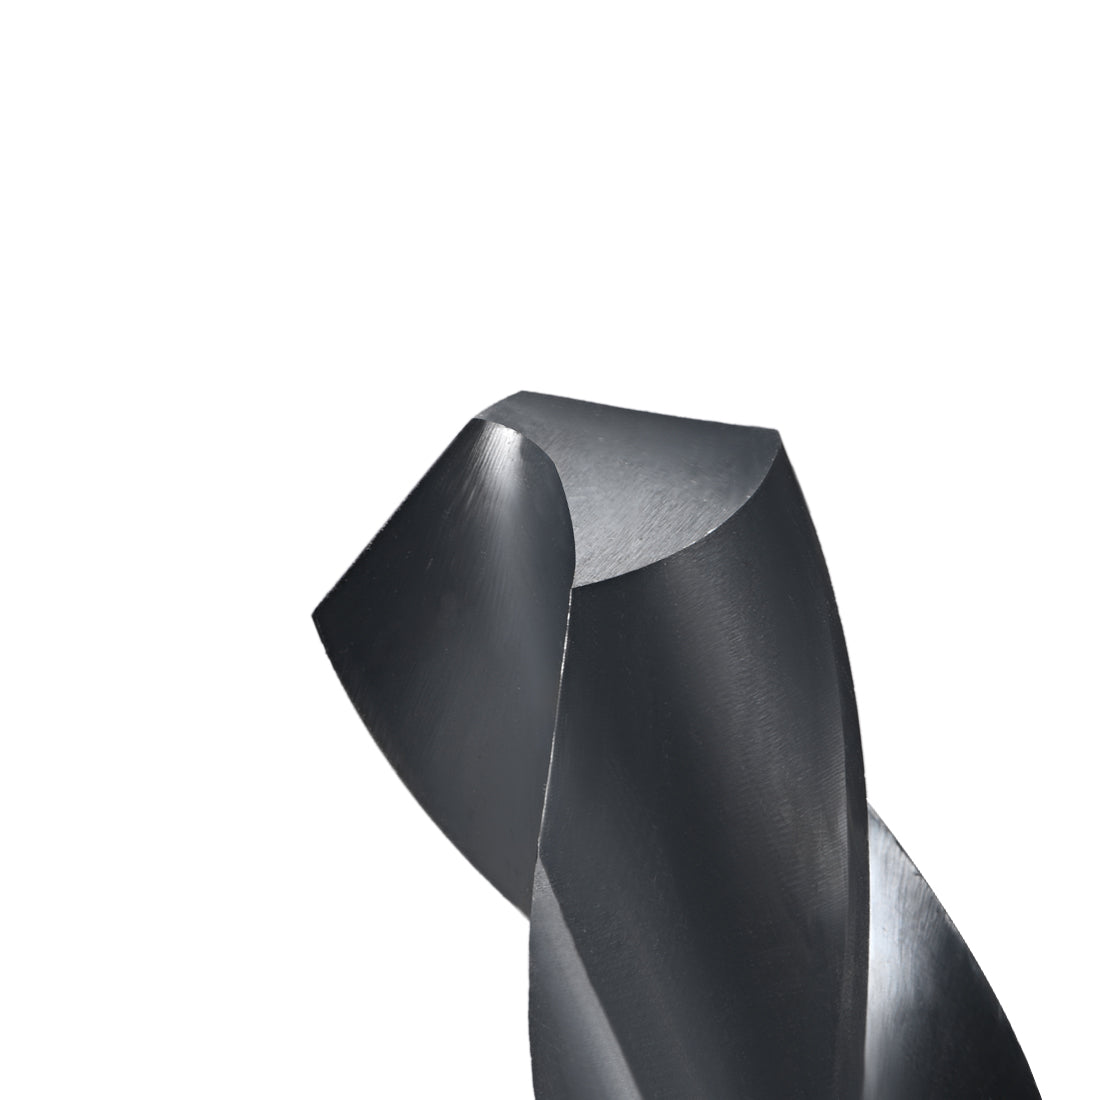 uxcell Uxcell Reduced Shank Drill Bit 19mm HSS 6542 Black Oxide with 1/2 Inch Straight Shank